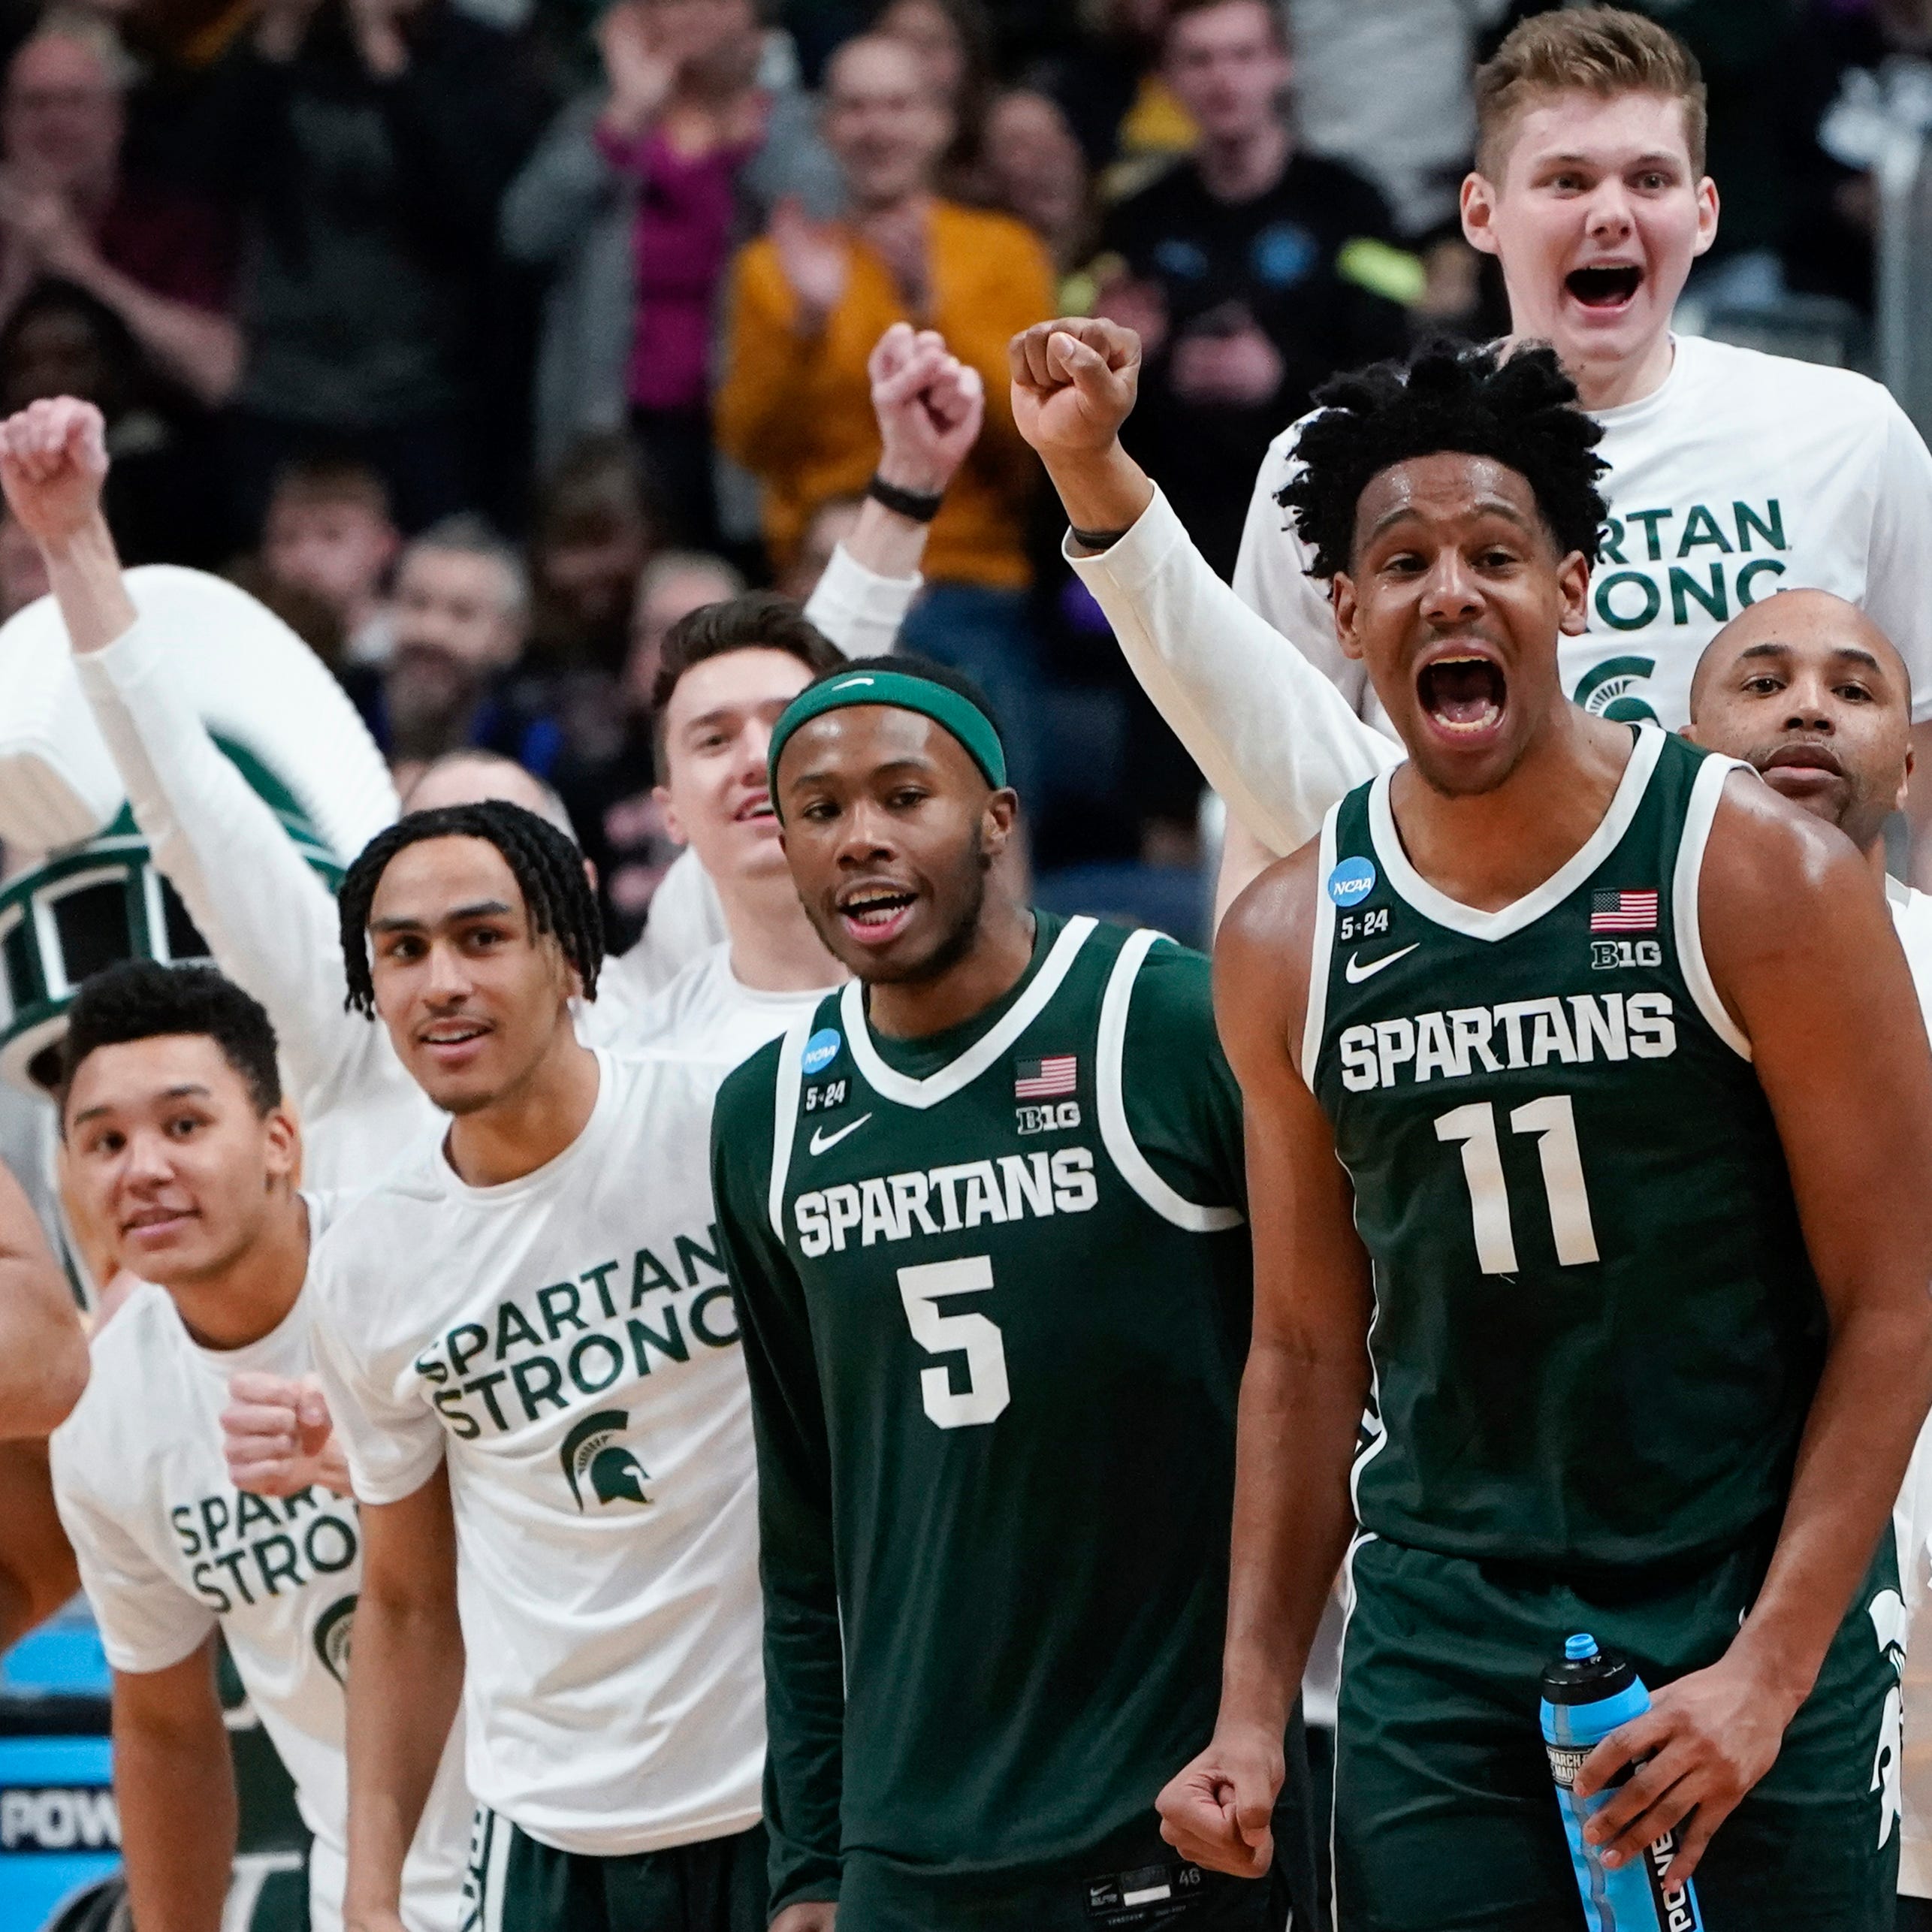 Michigan State players including Tre Holloman (5) and A.J. Hoggard (11) celebrate on the bench during their second-round win over Marquette in the NCAA men's basketball tournament.